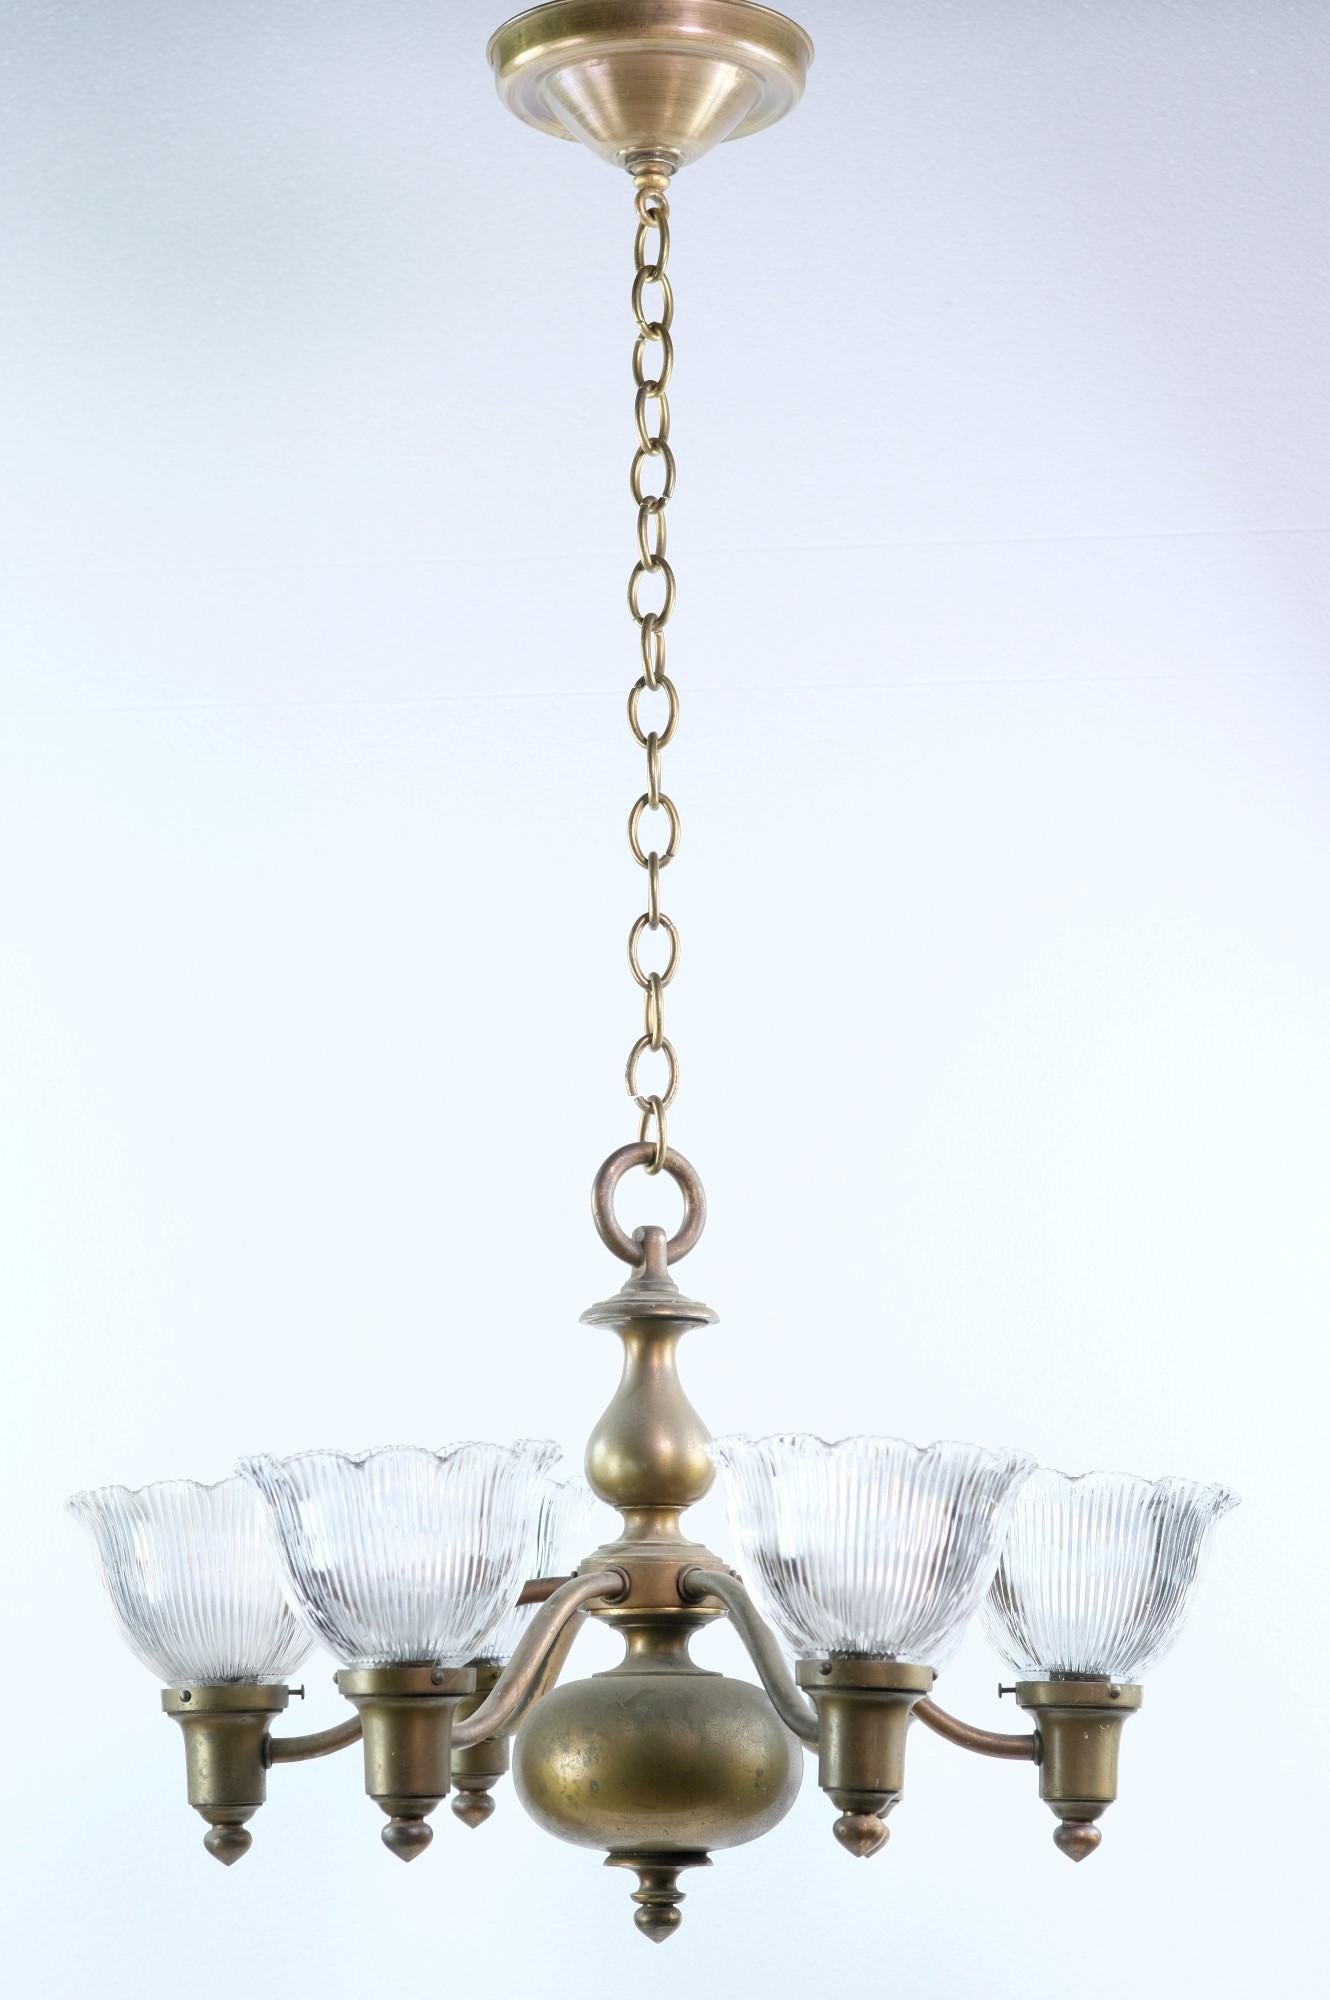 1910s Bronze Chandelier W/ 6 Lights Fitted with Ruffled Holophane Glass Shades 7